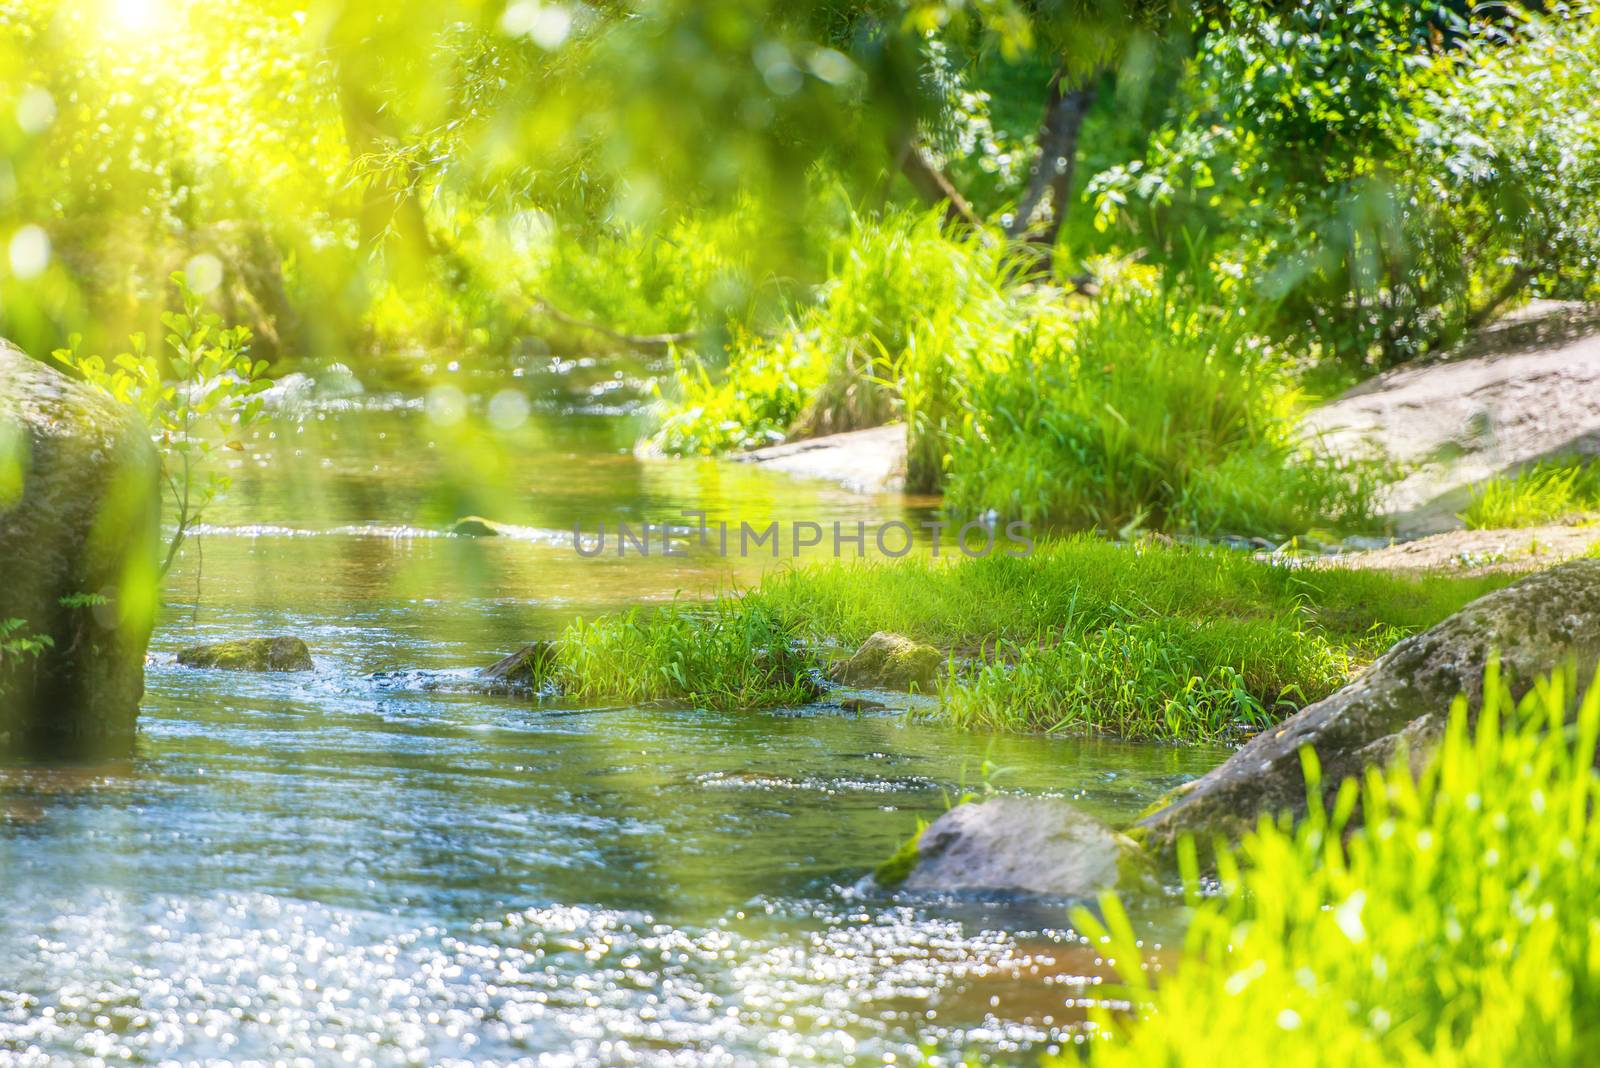 Stream in the green forest and sun shining through foliage